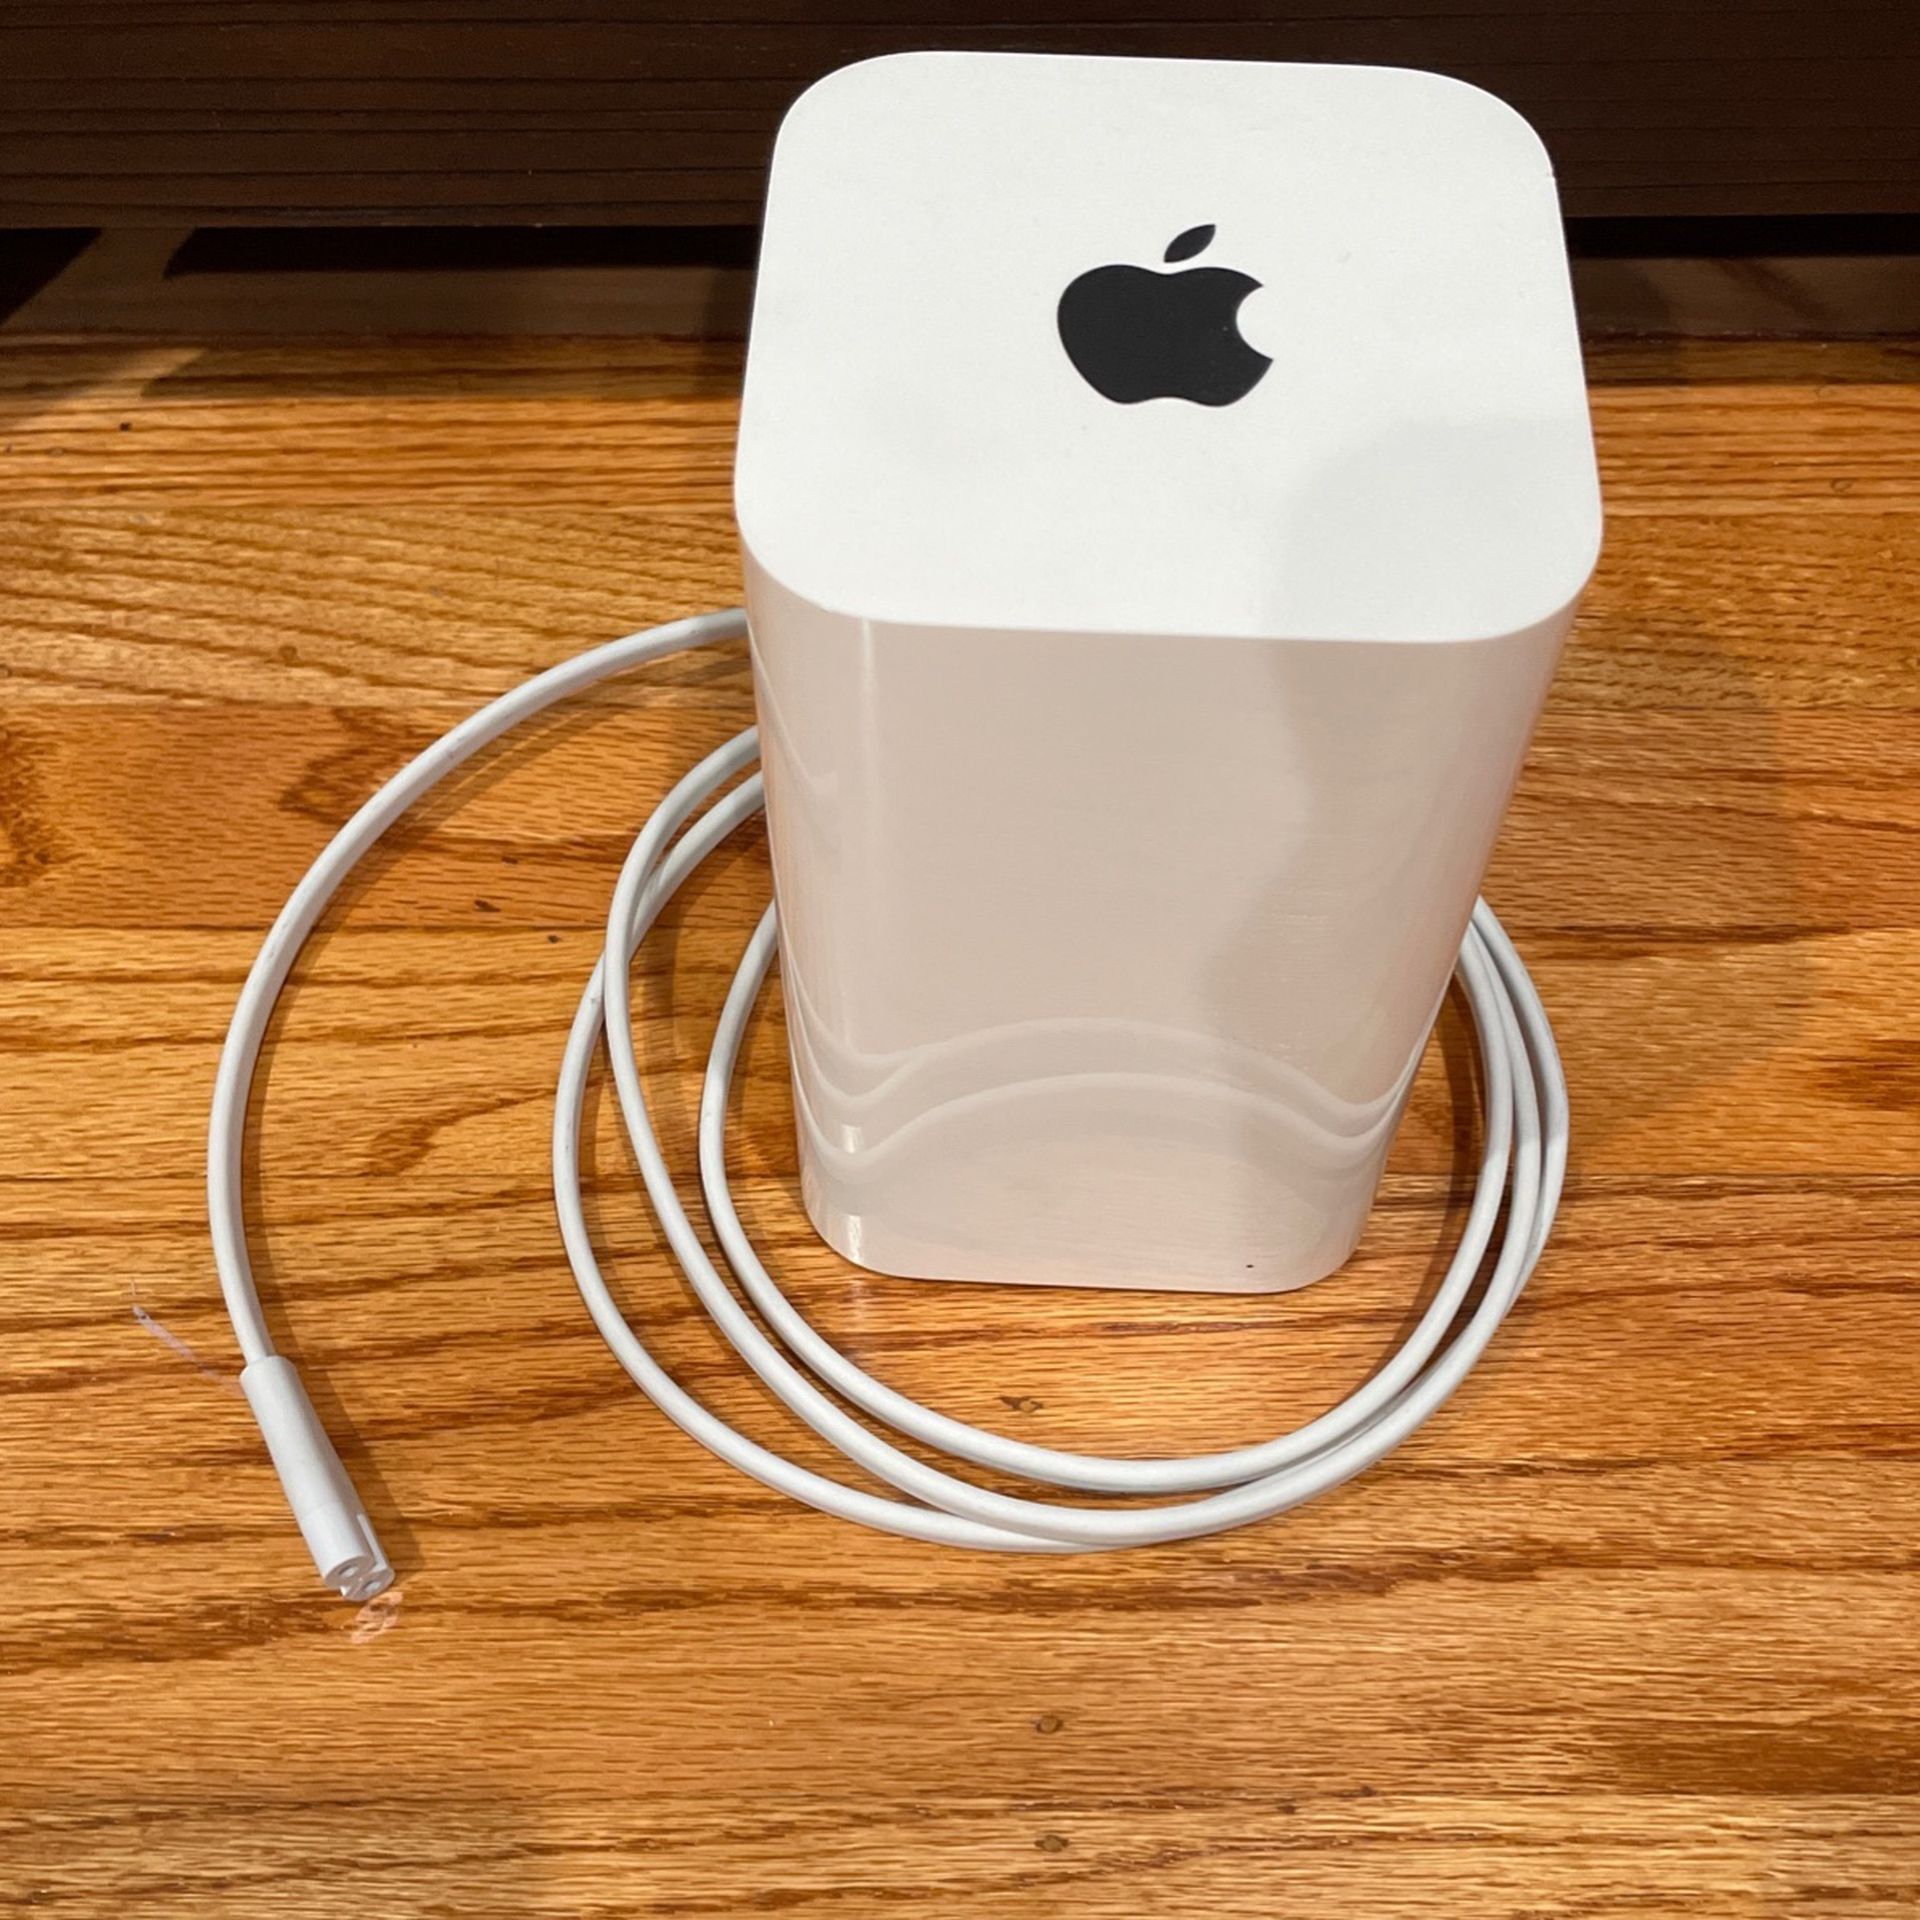 Apple Airport Extreme Router 6th Gen